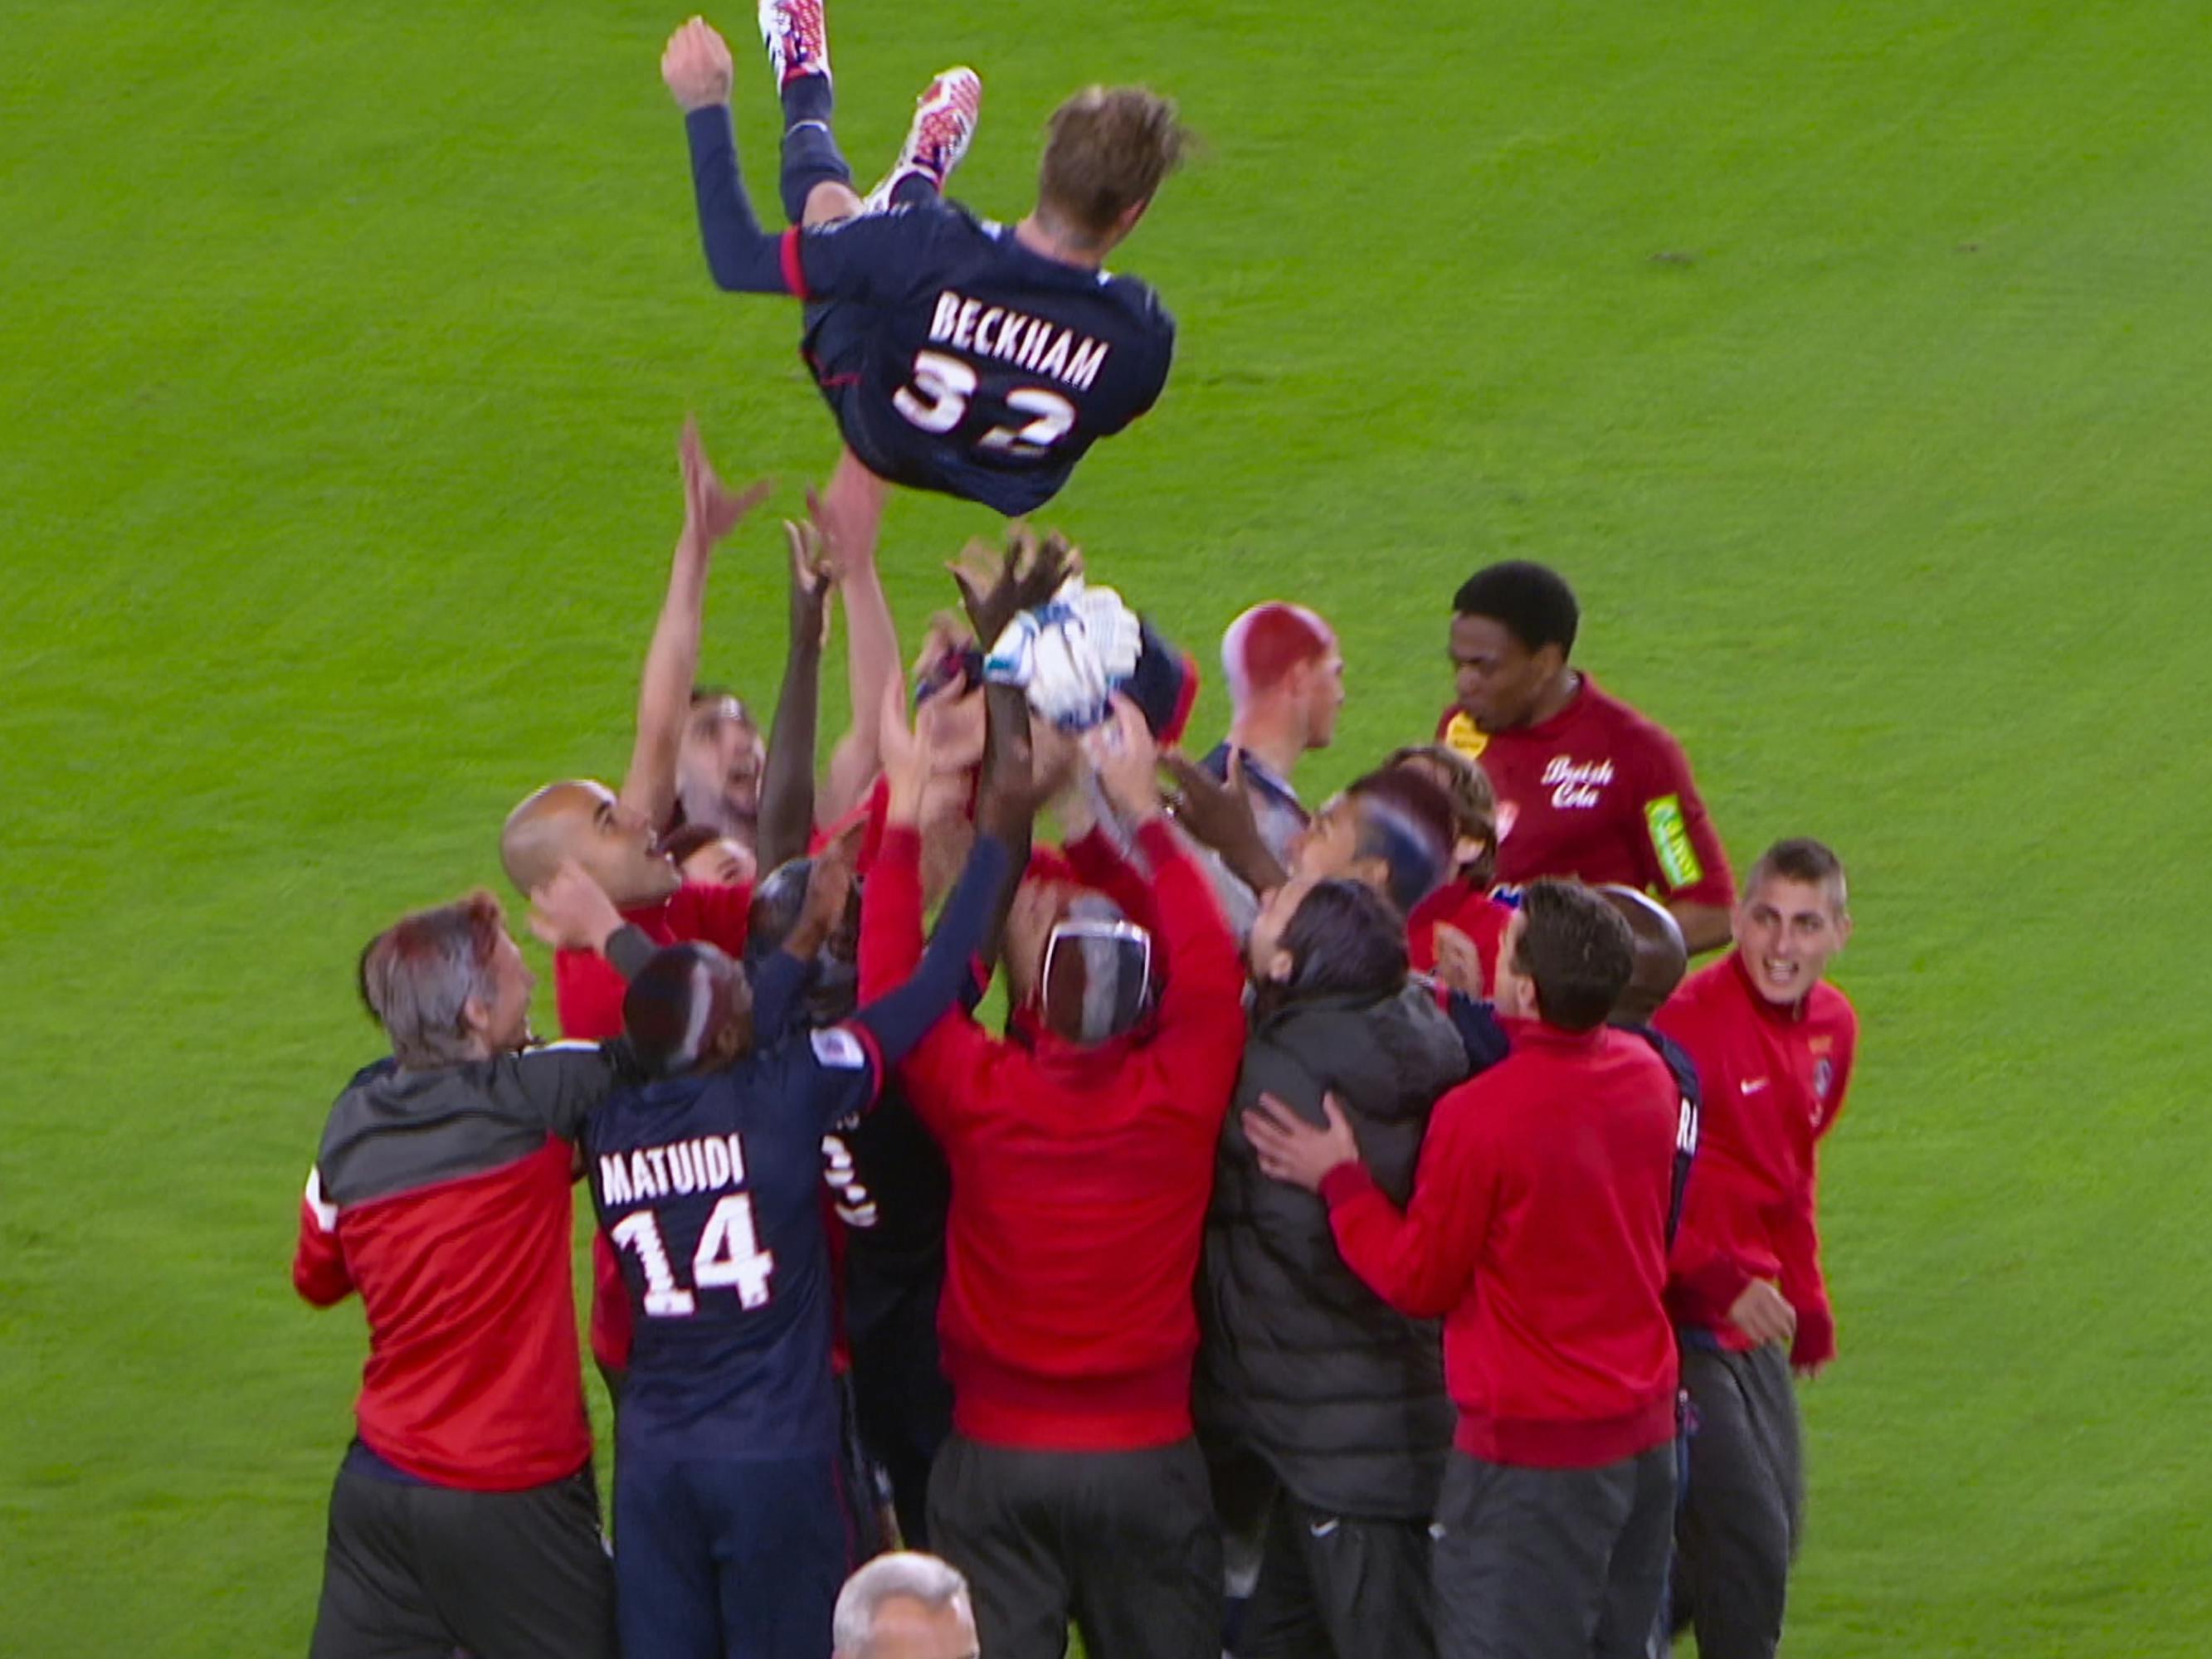 David Beckham gets thrown into the air by some teammates wearing red, black, and navy.